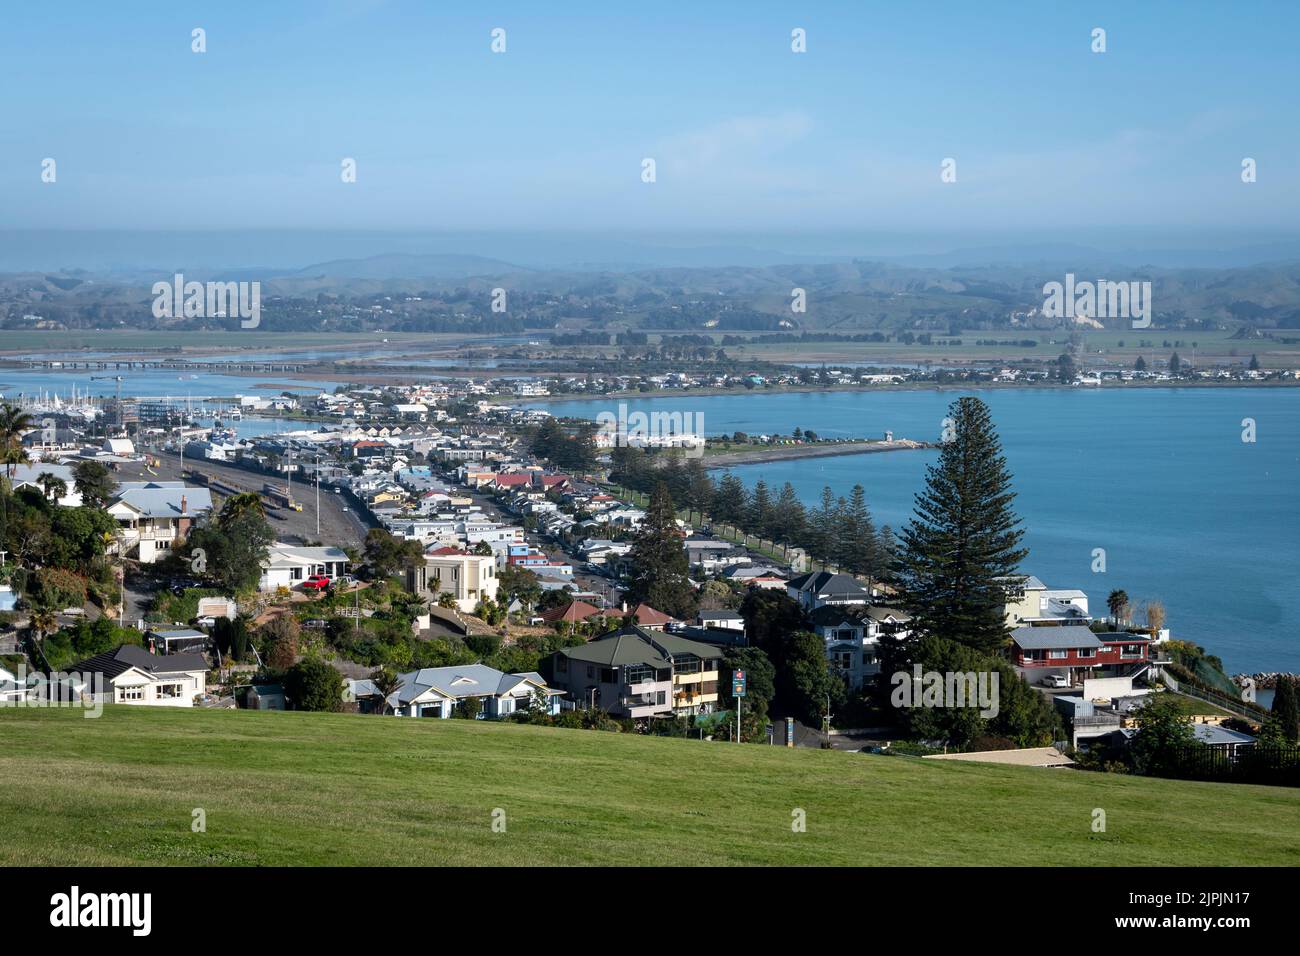 View over town and Ahuriri Estuary, Napier, Hawkes Bay, North Island, New Zealand Stock Photo